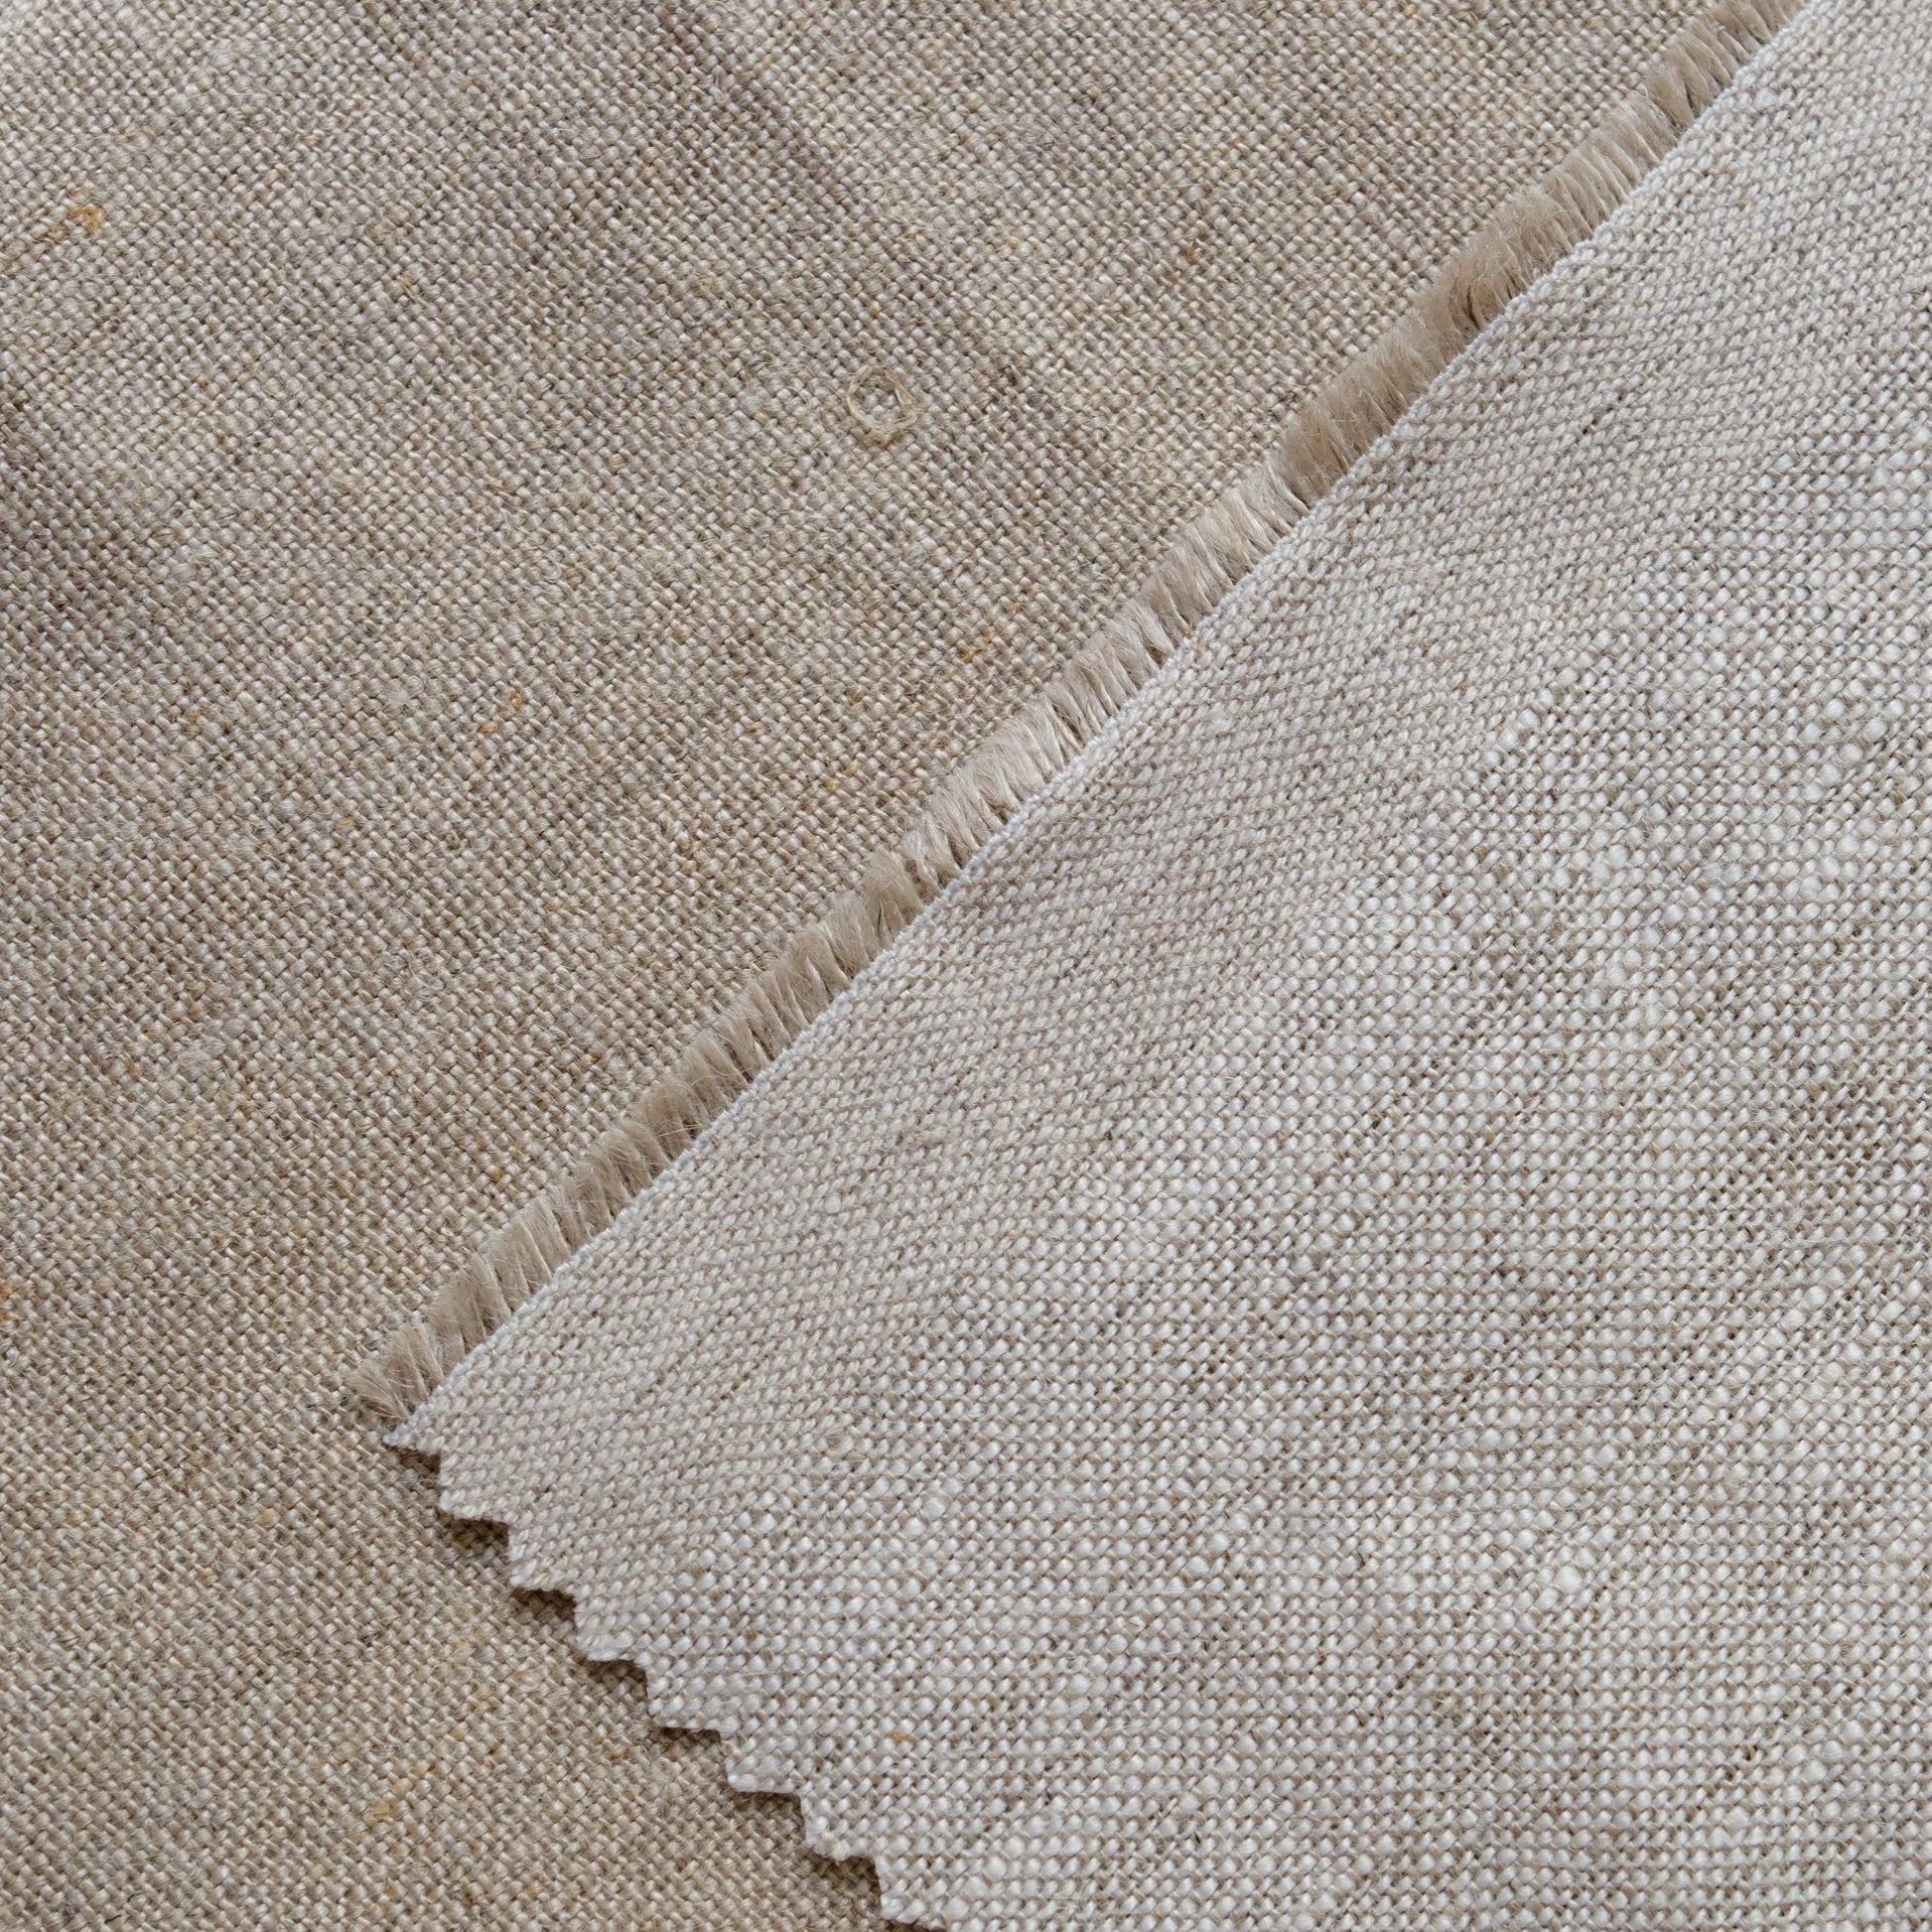 Linen in oatmeal base which is lighter in colour and flax base, darker in colour.